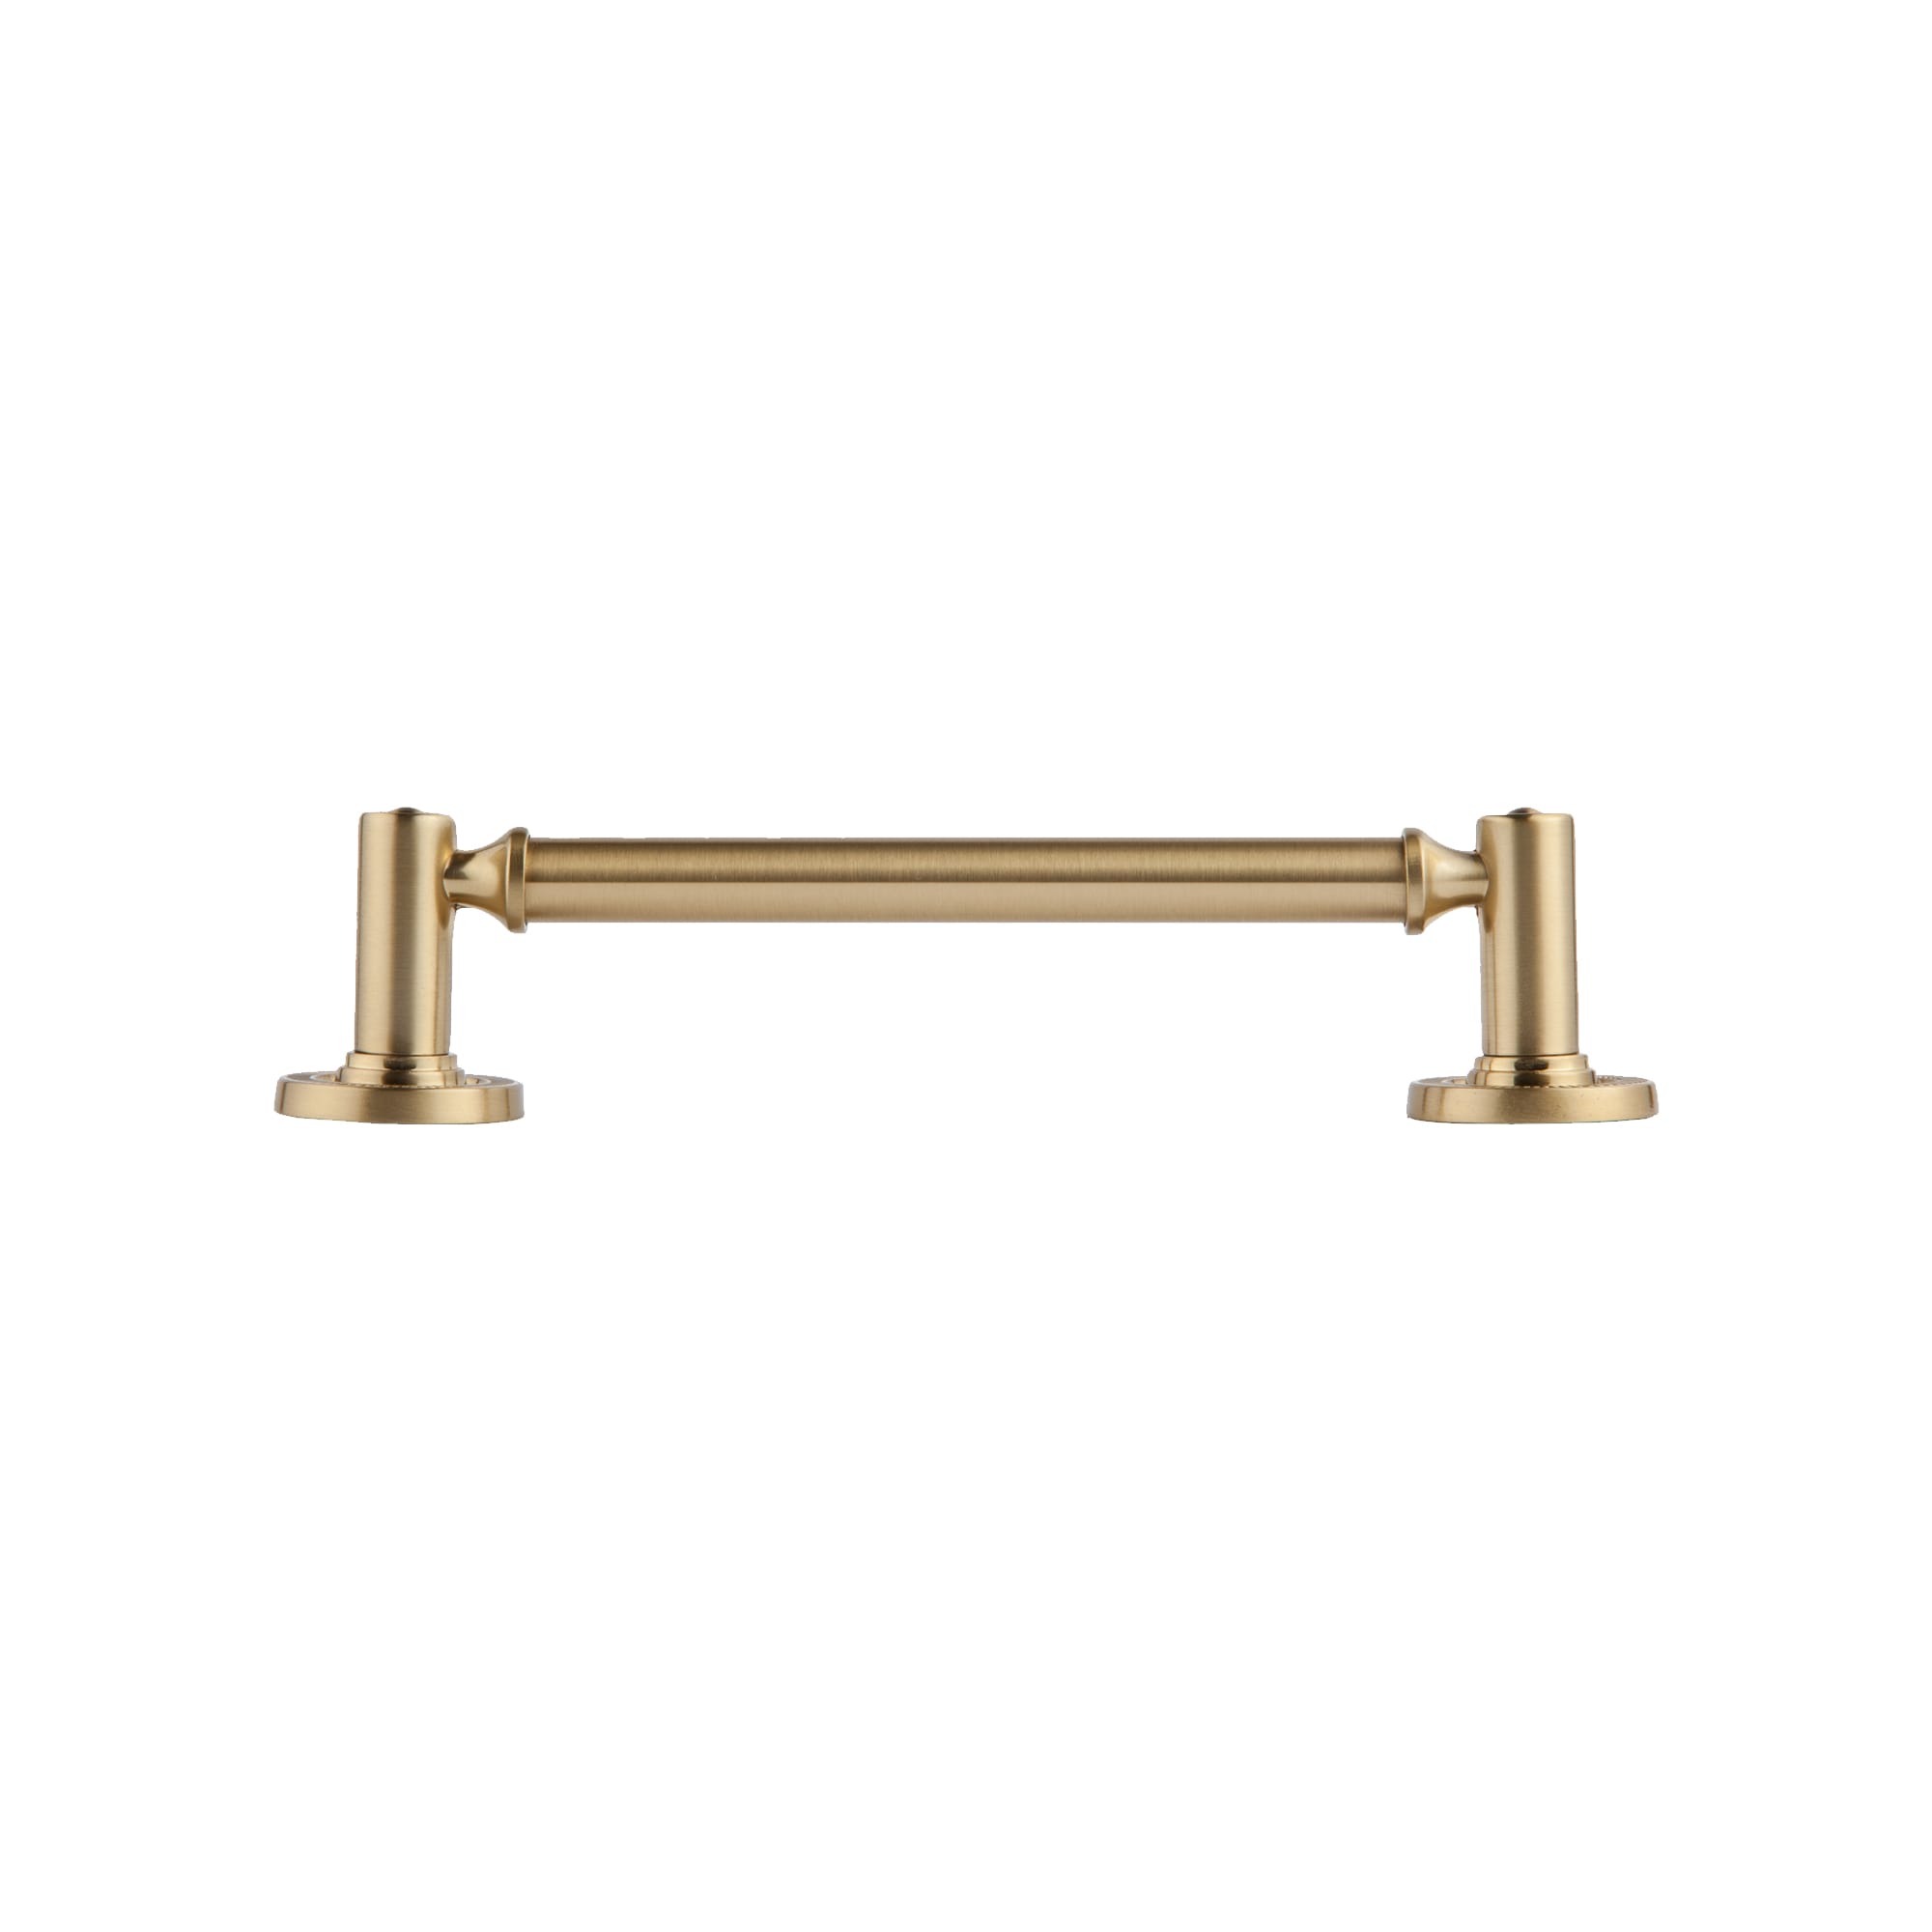 Drawer Cup Handles. Front Fixing Solid Brass Drawer Pulls. Perfect